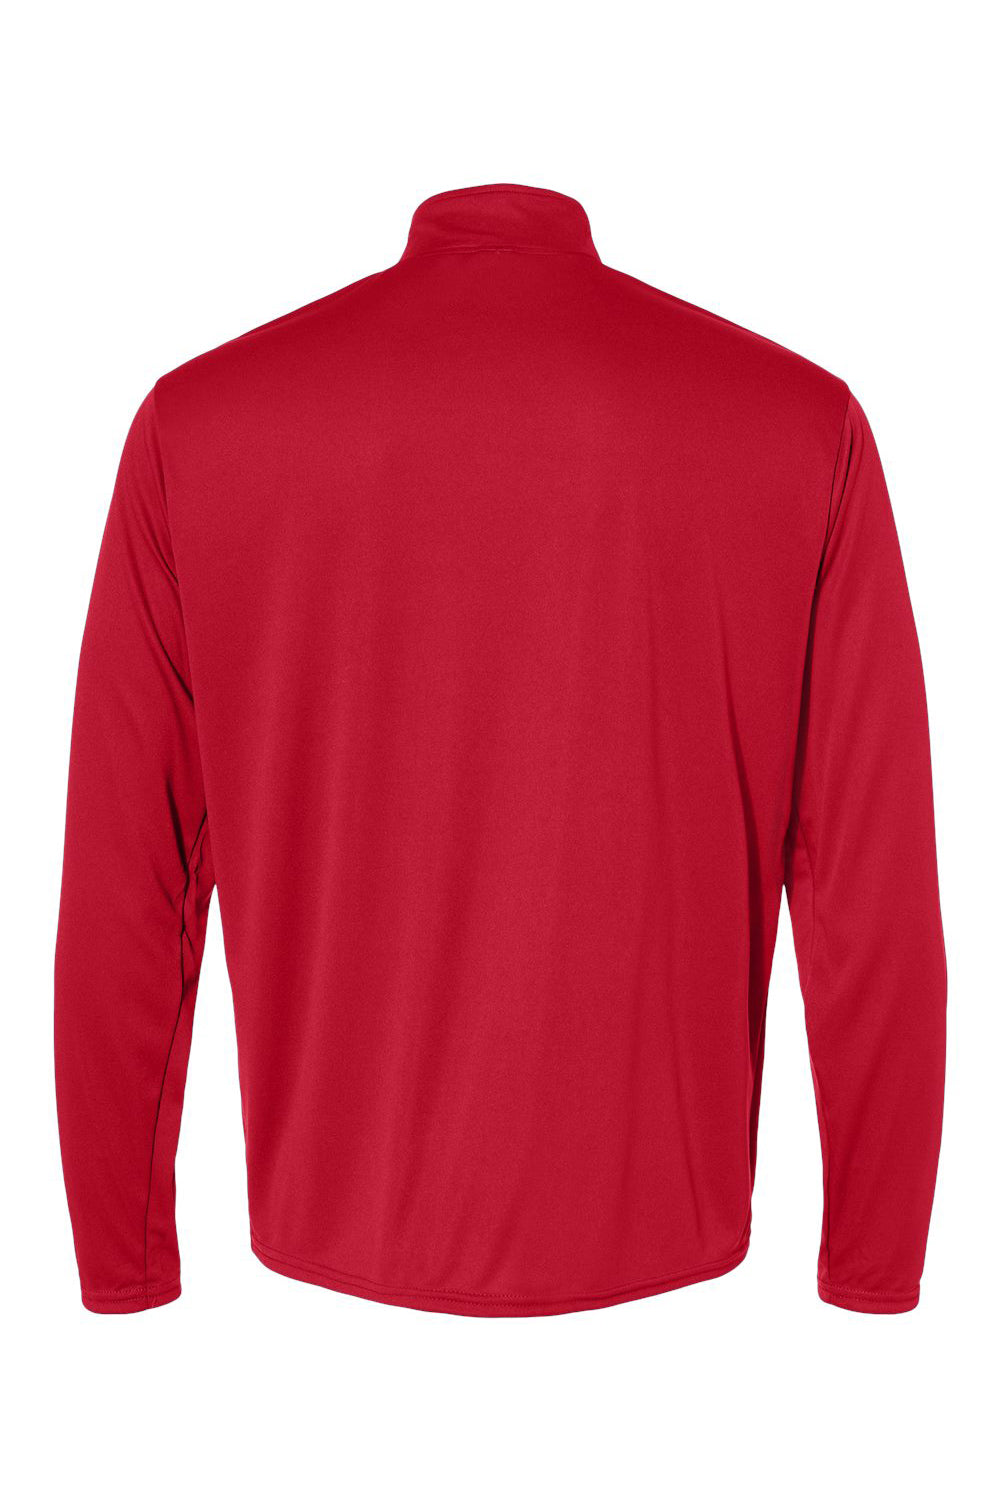 C2 Sport 5102 Mens Moisture Wicking 1/4 Zip Pullover Red Flat Back